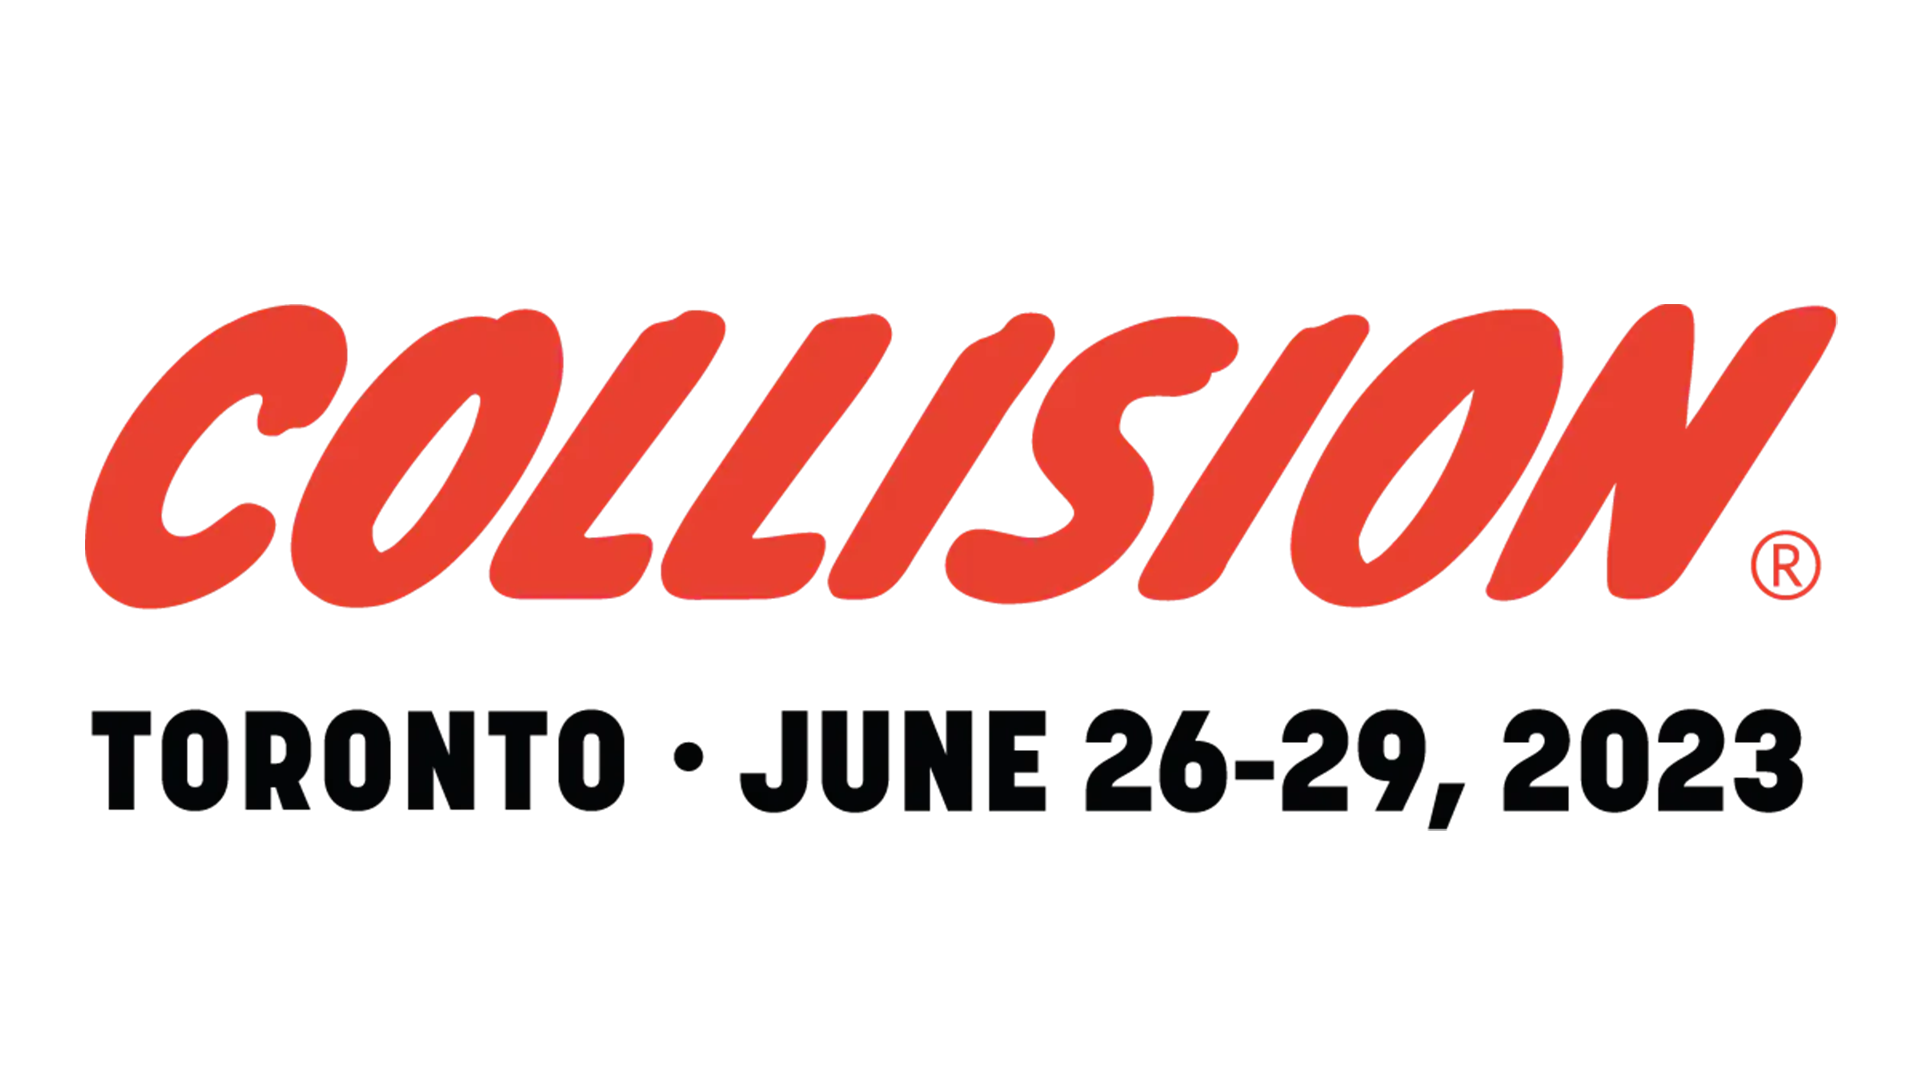 Participated in Collision Conference 2023